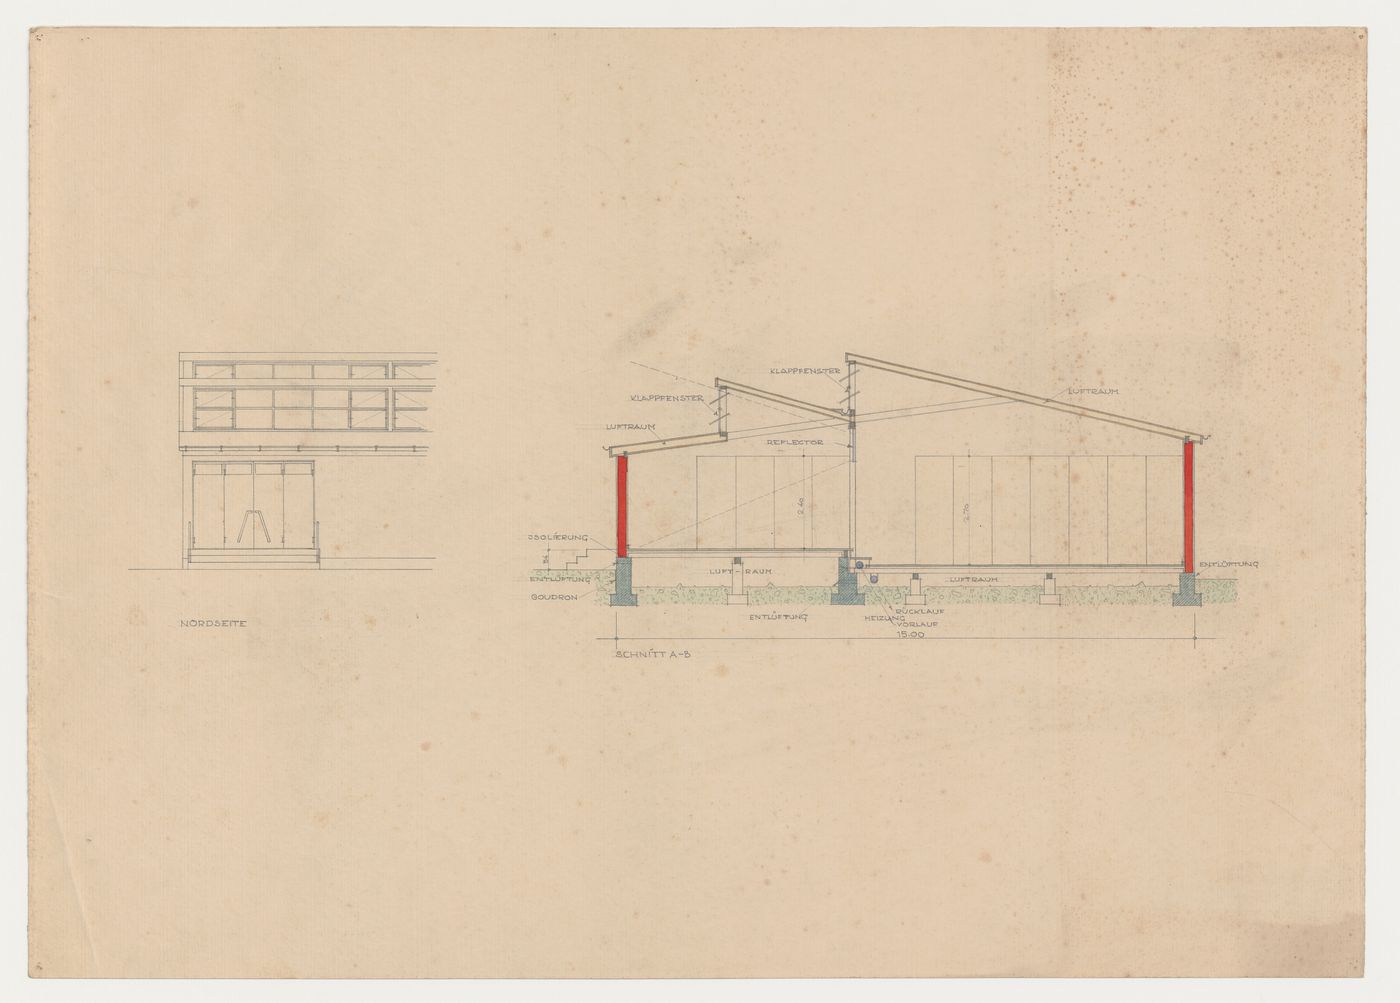 Partial north elevation and section for an exhibition hall, Frankfurt am Main, Germany